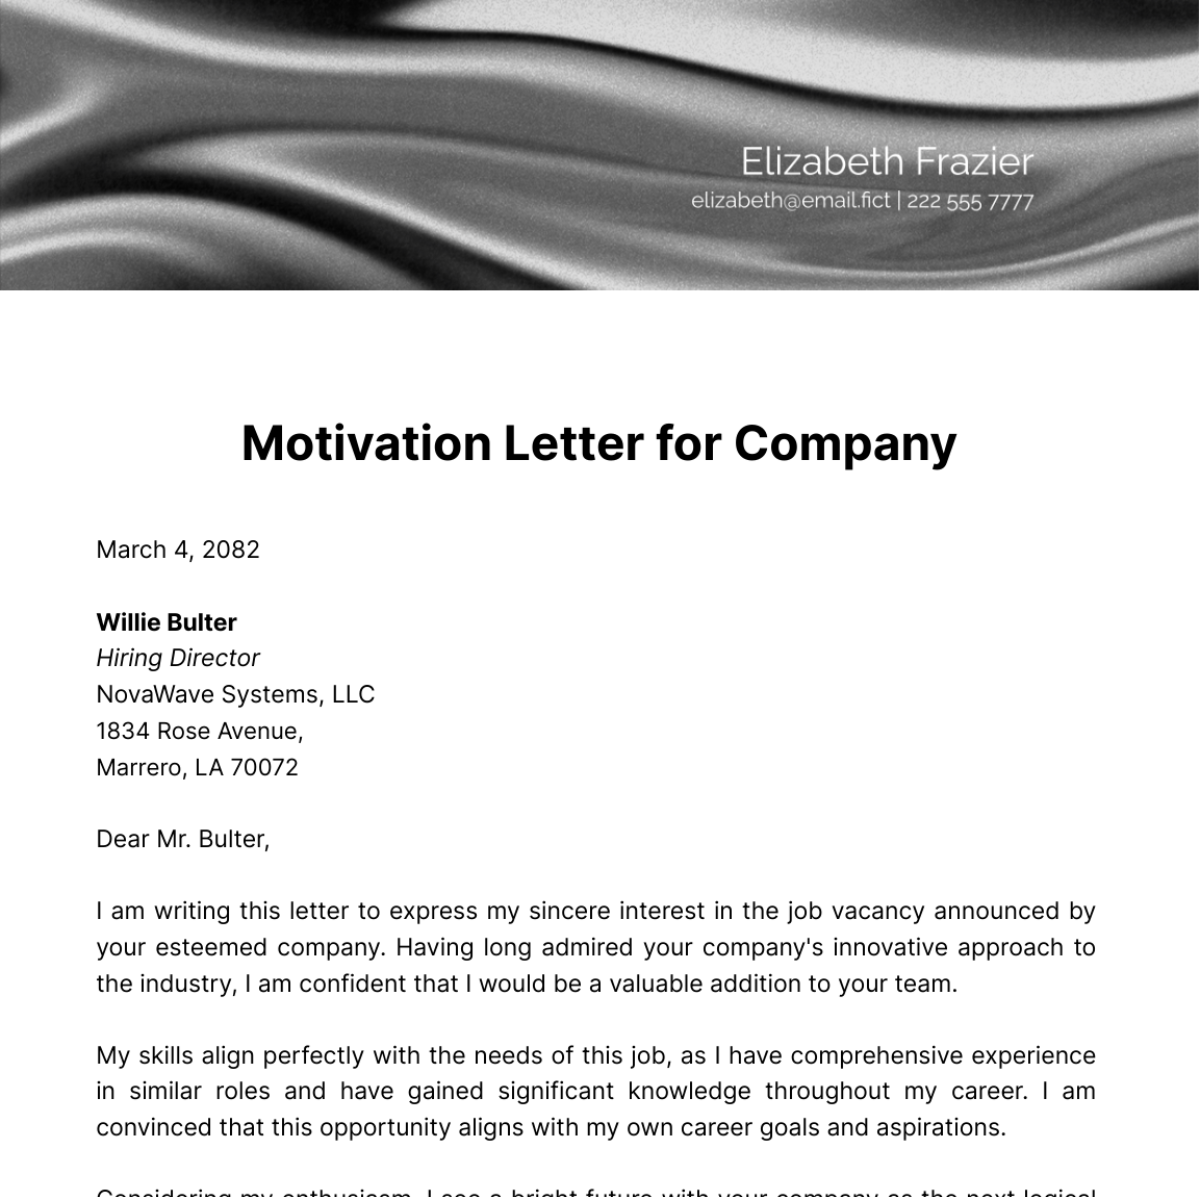 Motivation Letter for Company Template